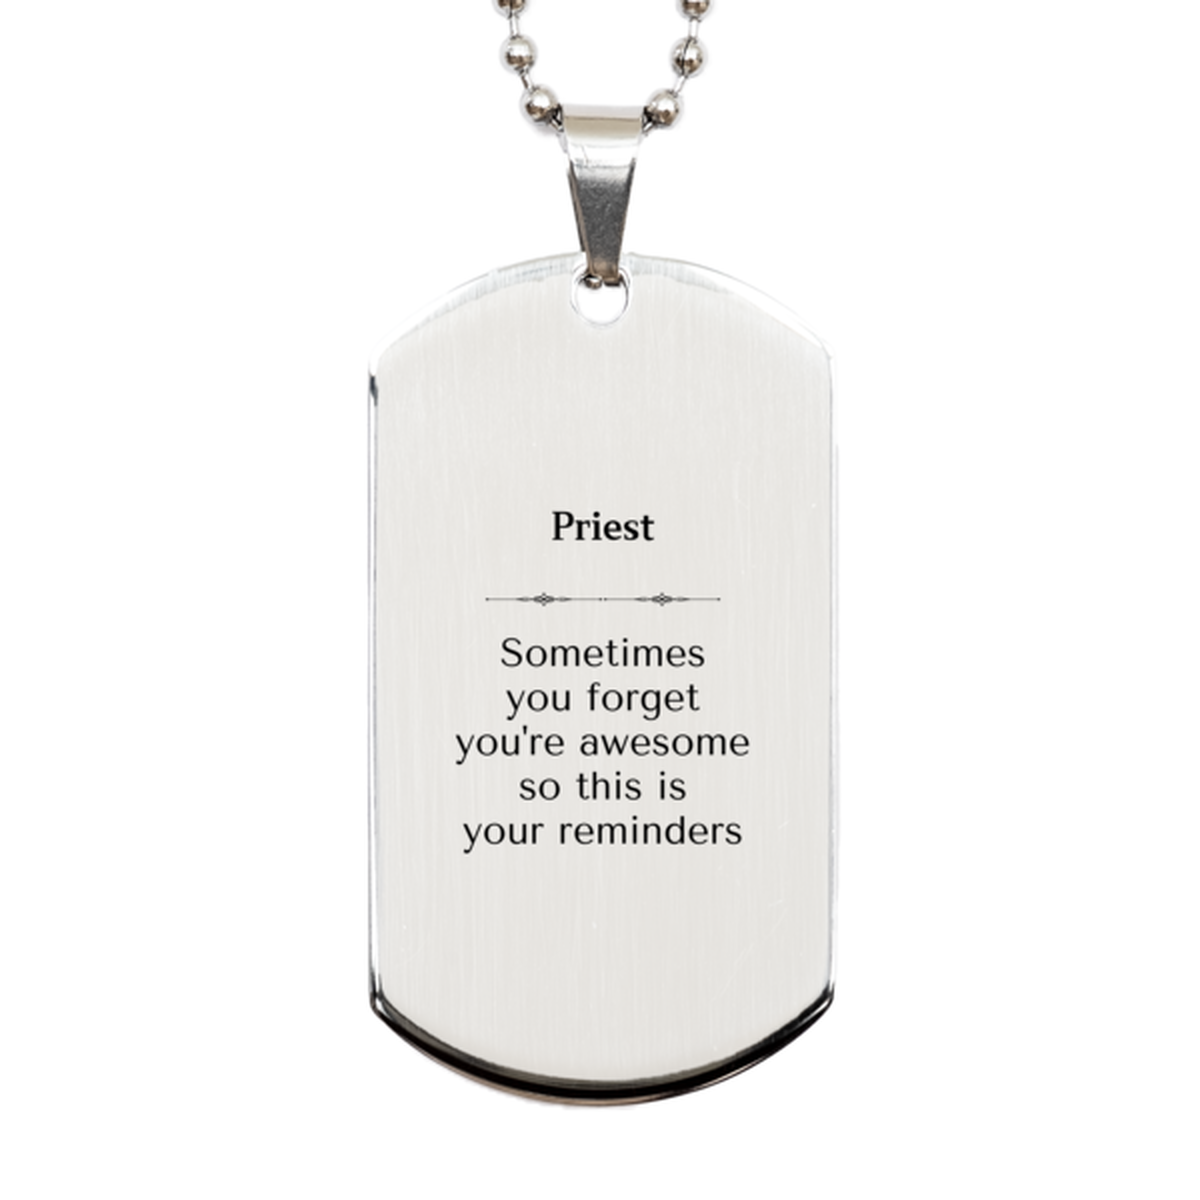 Sentimental Priest Silver Dog Tag, Priest Sometimes you forget you're awesome so this is your reminders, Graduation Christmas Birthday Gifts for Priest, Men, Women, Coworkers